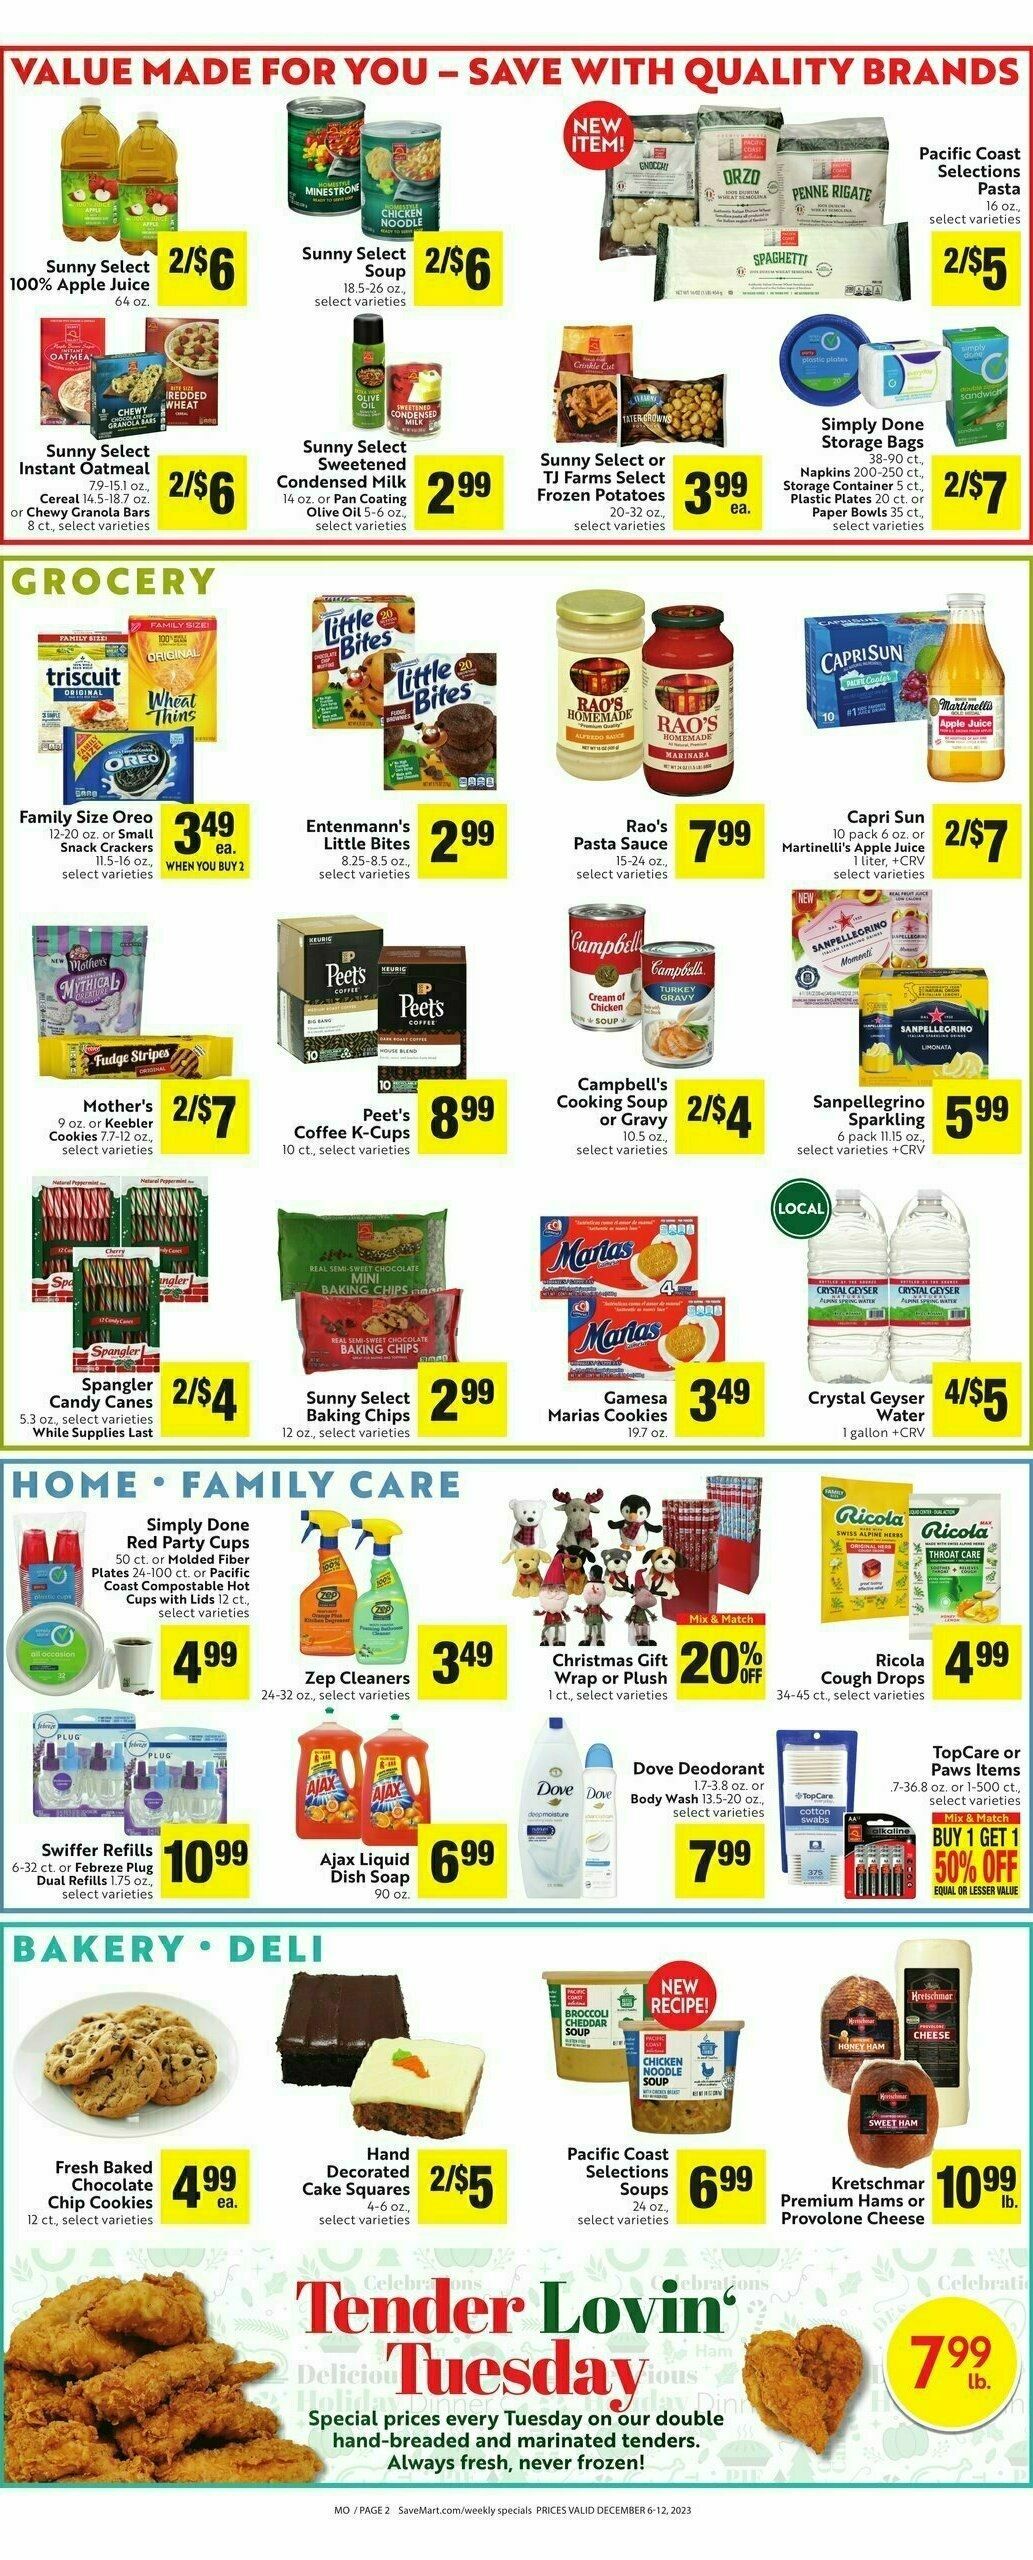 Save Mart Weekly Ad from December 6